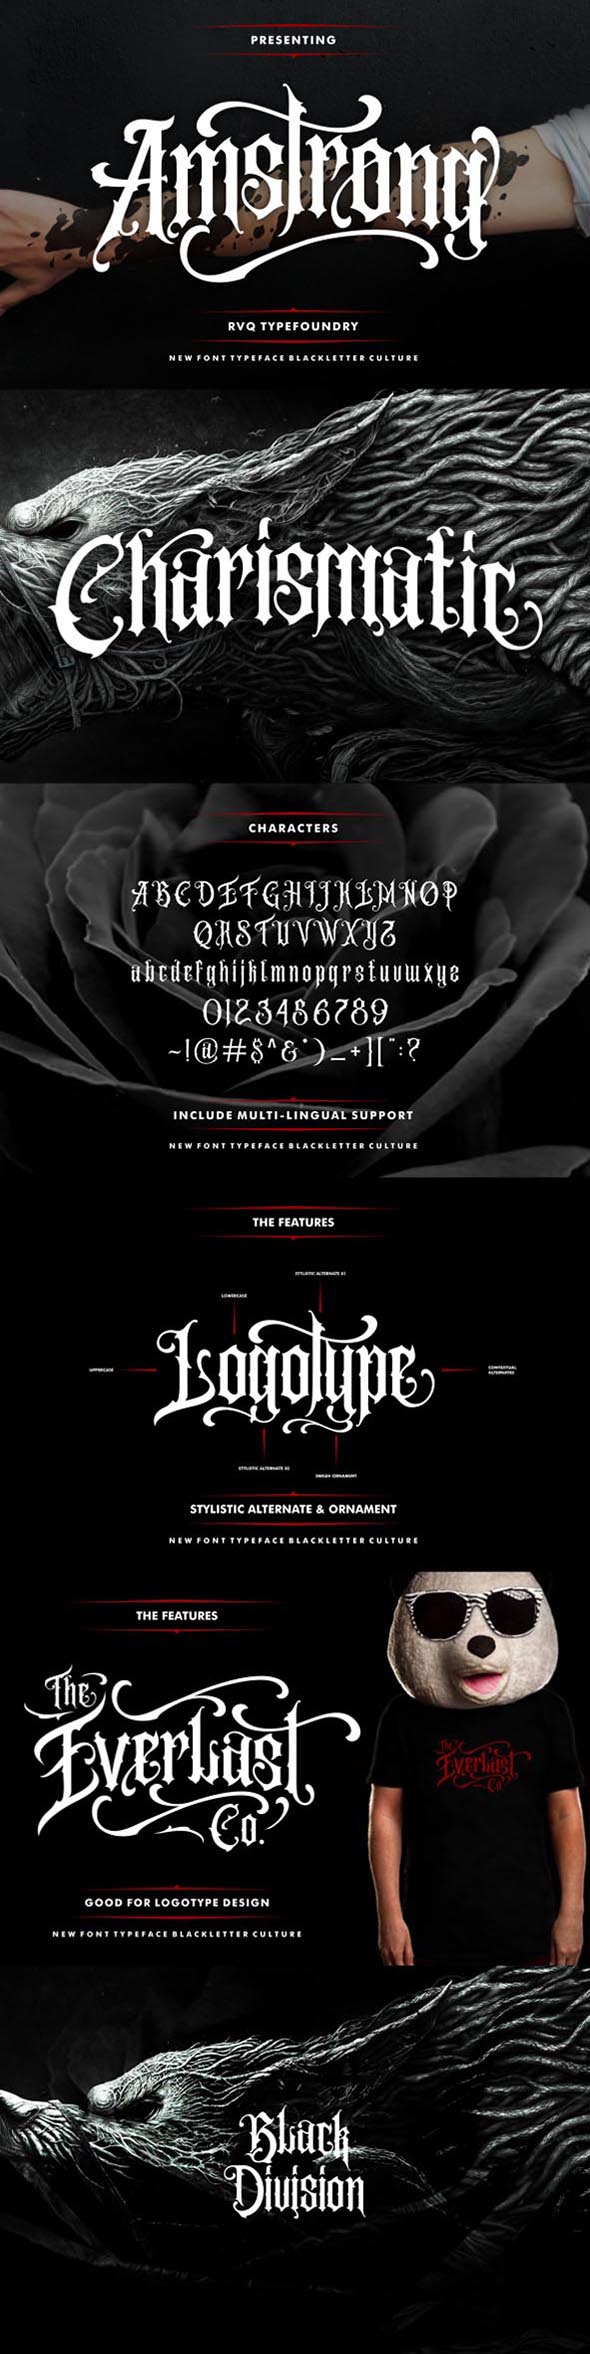 Amstrong Typeface